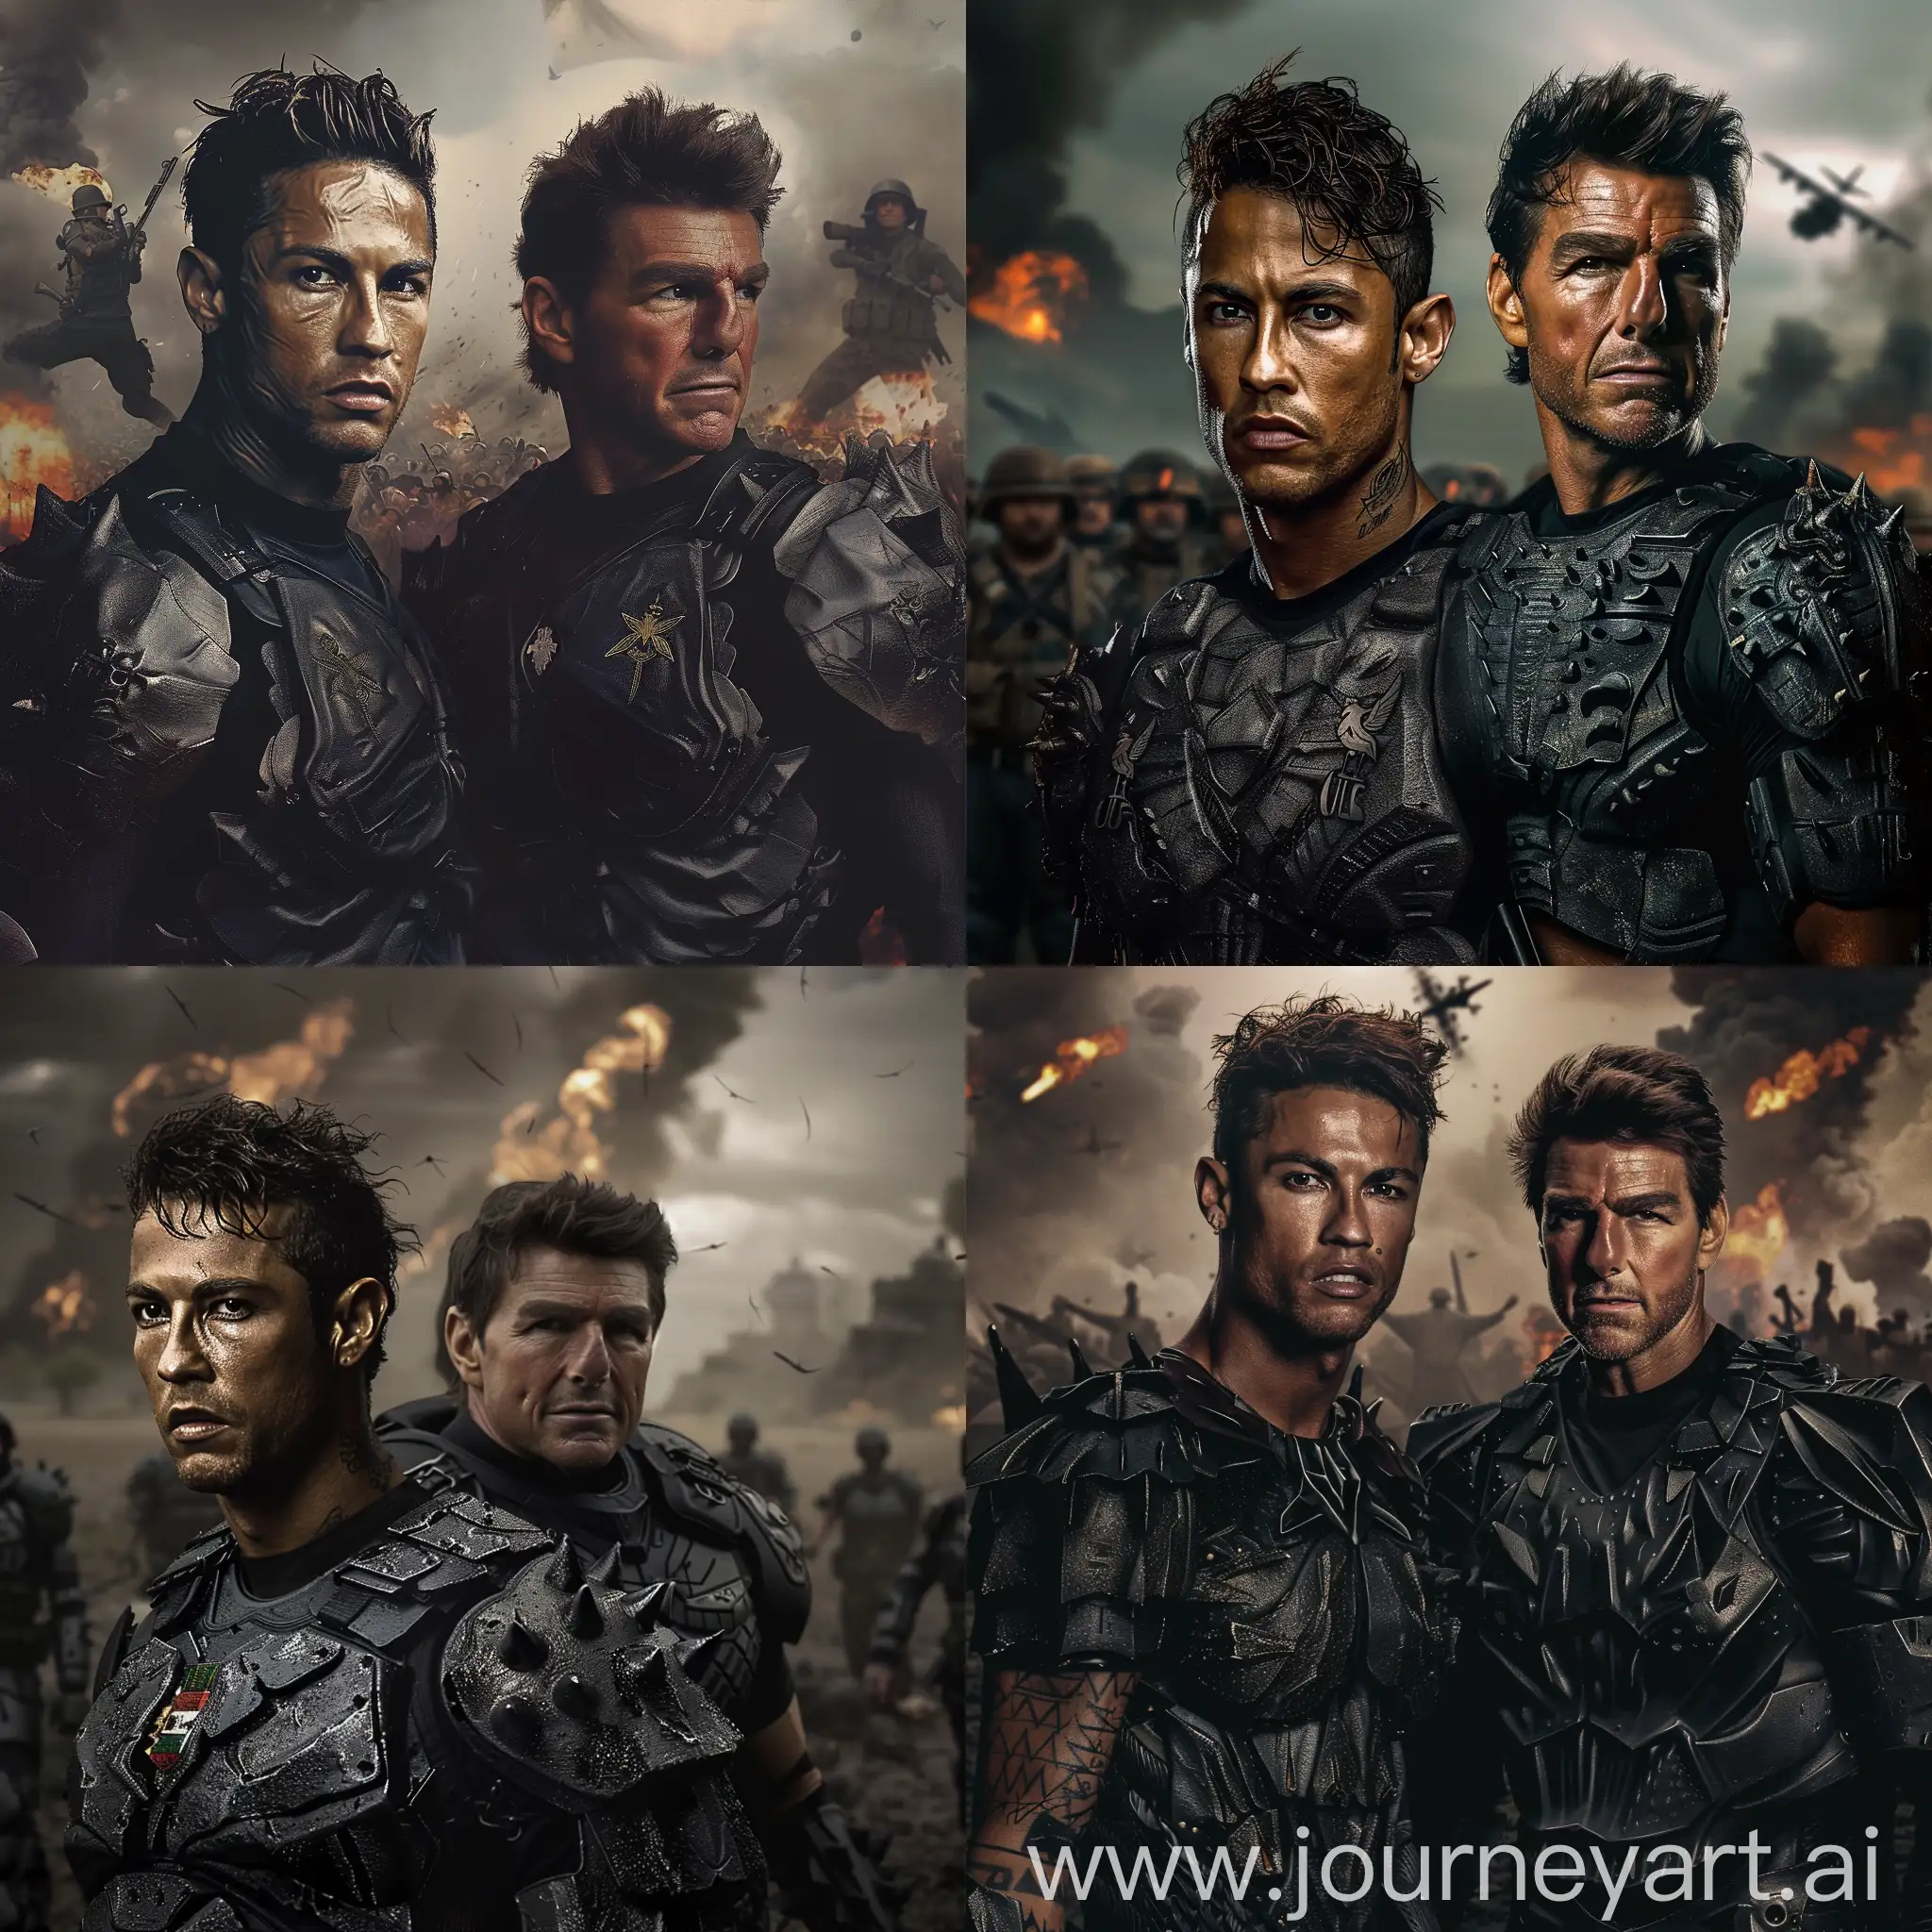 /imagine Neymar with big black detailed armor, next to Neymar is Tom Cruise with big black armor too, military armor, in the background a war, portrait photography, --v 6.0